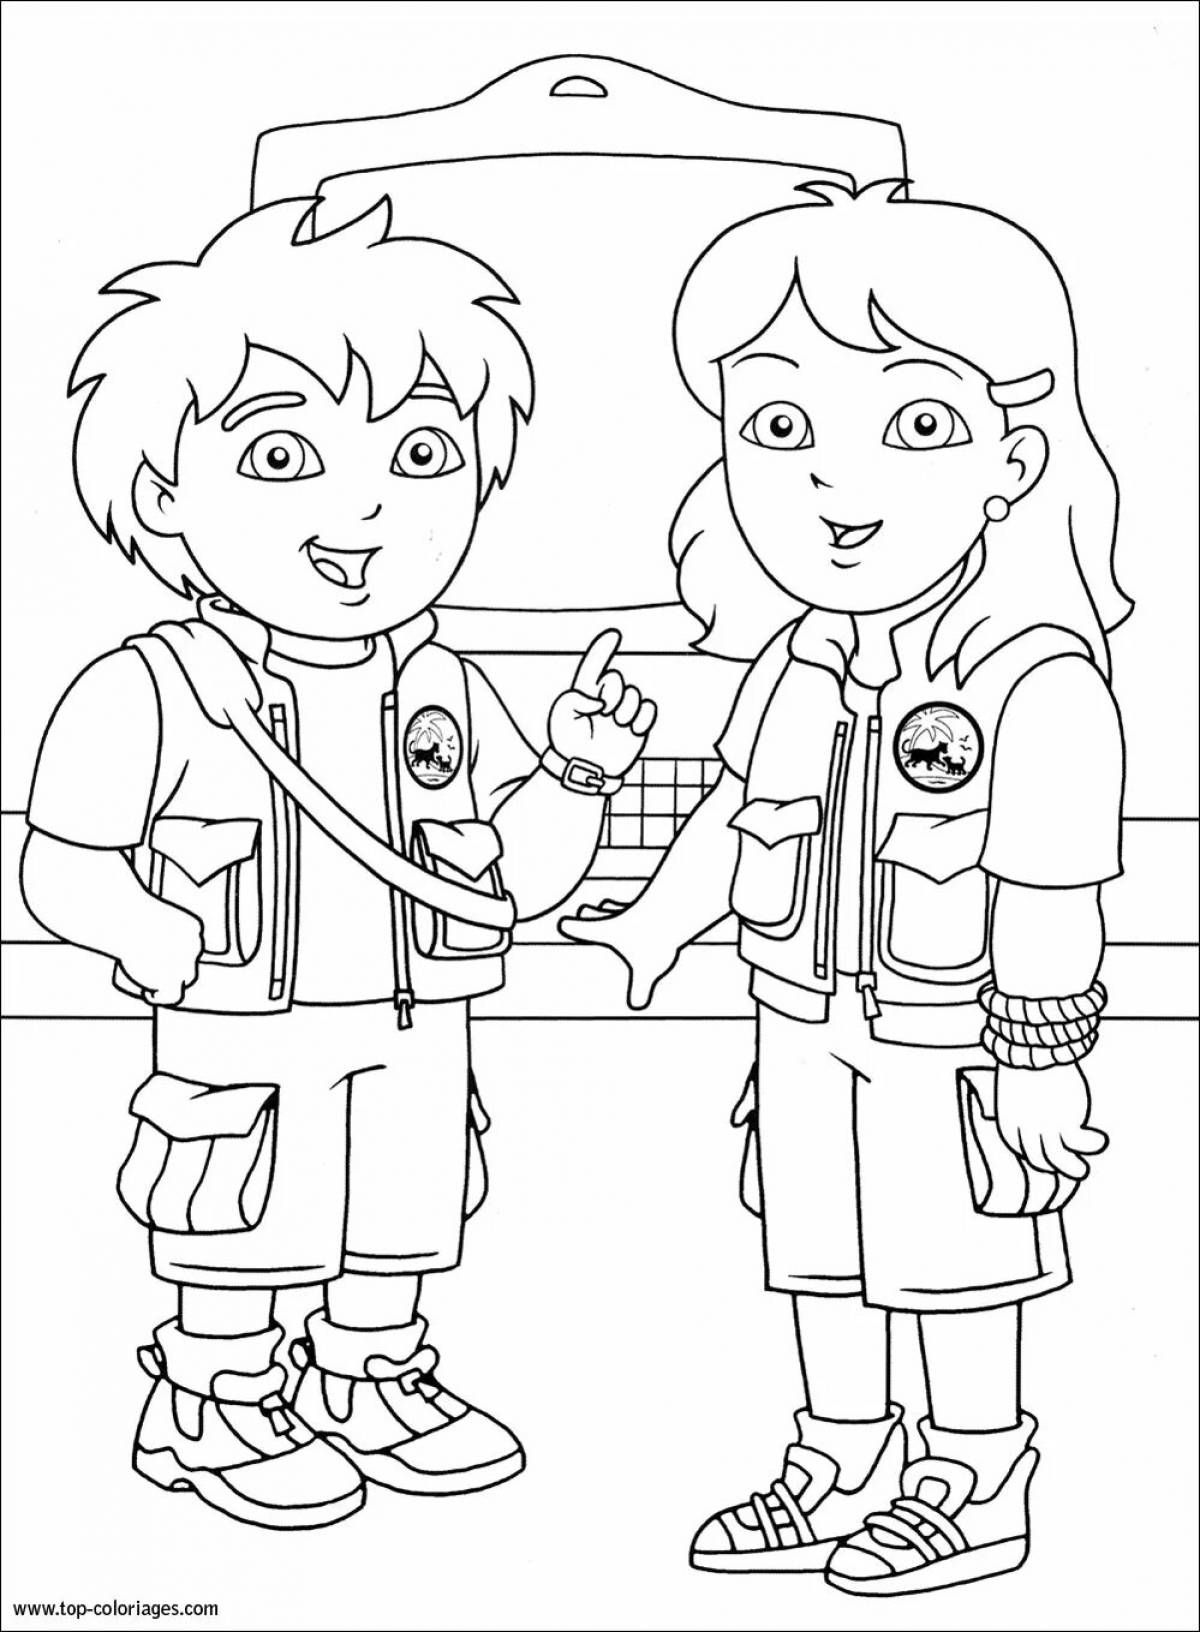 Cute diego coloring page